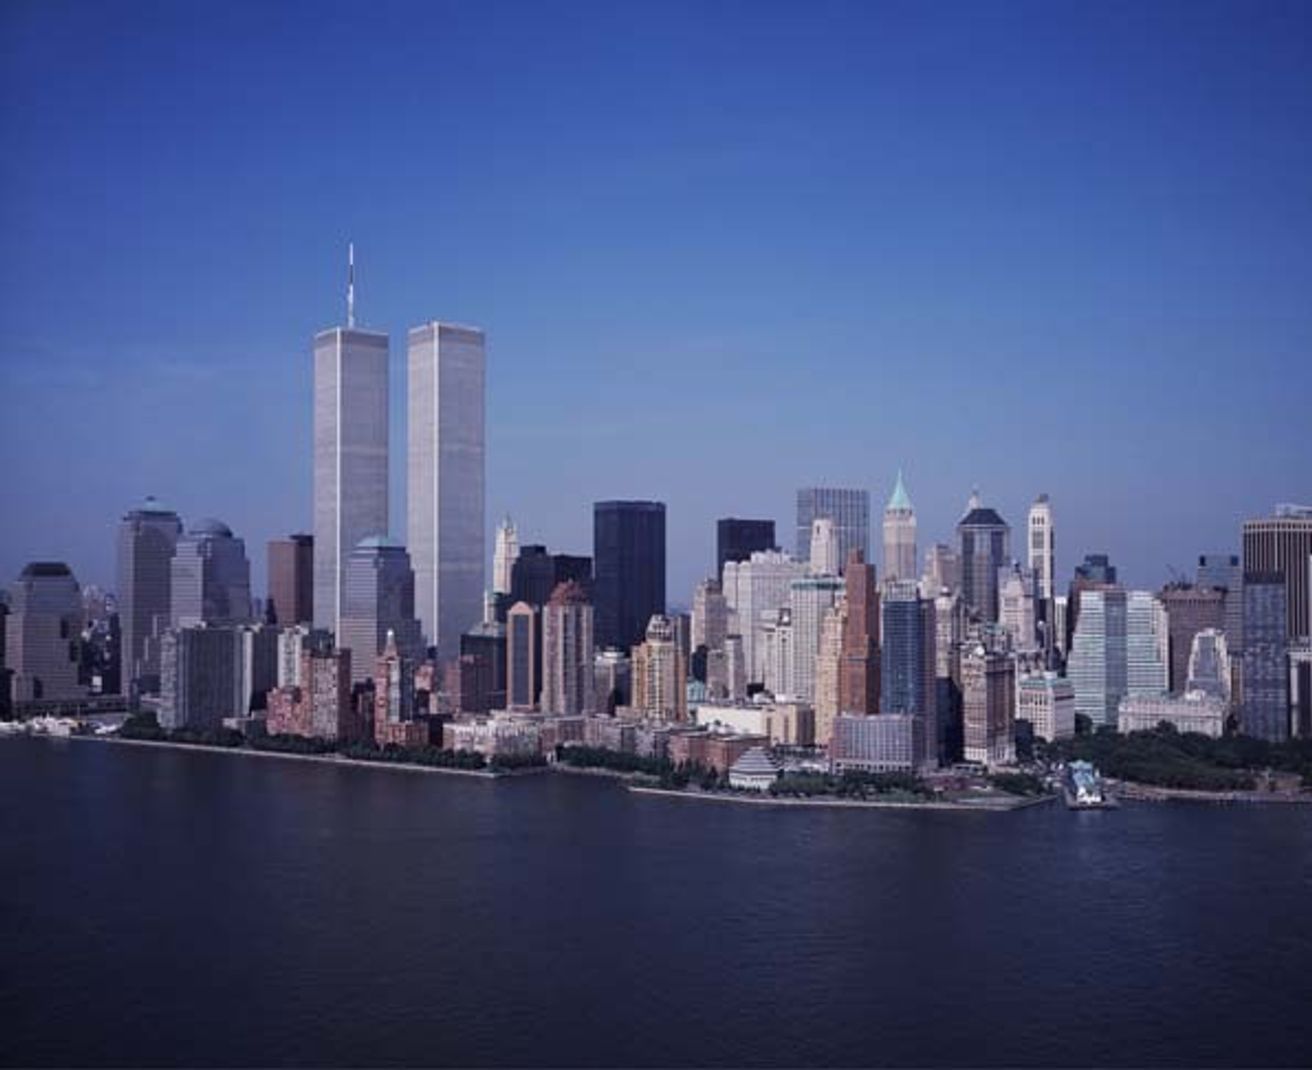 List of tenants in One World Trade Center - Wikipedia